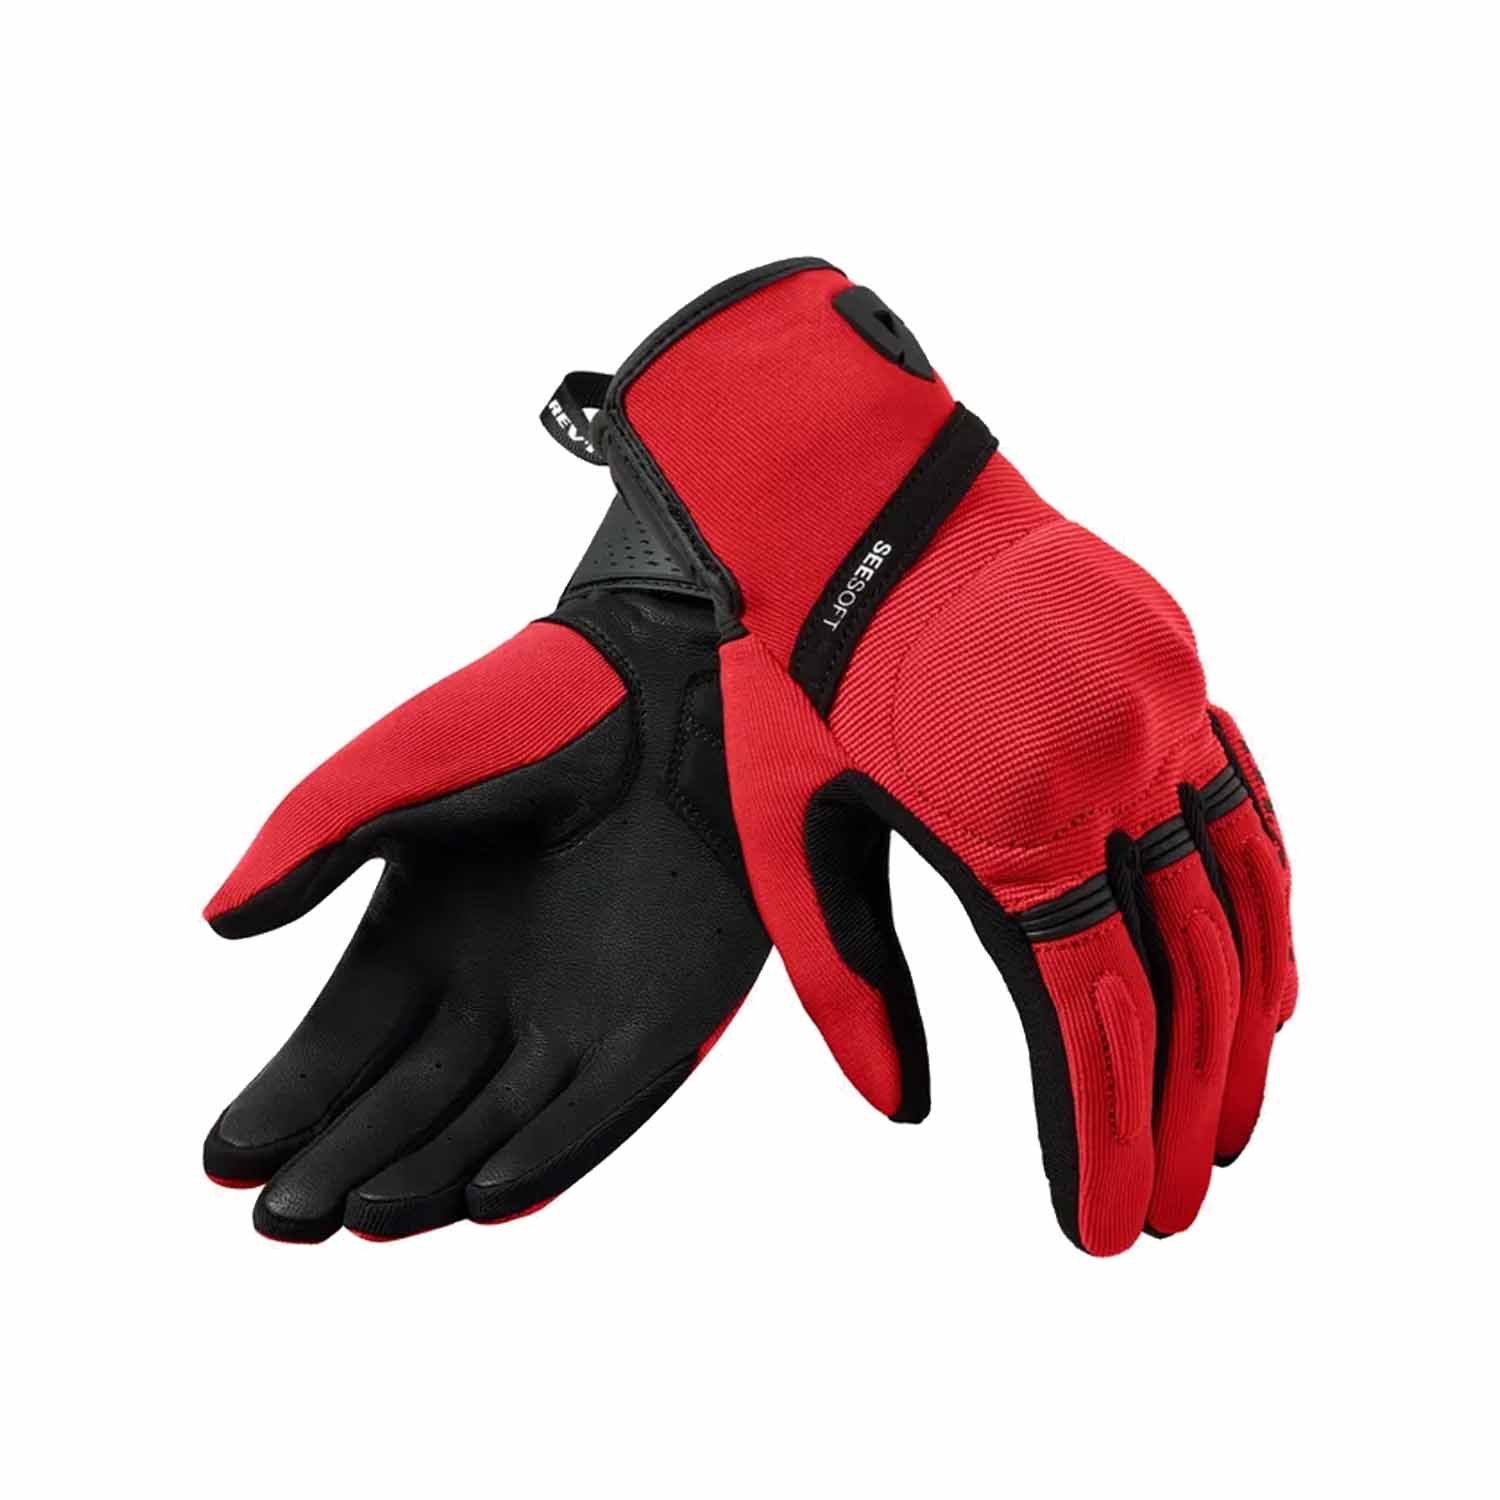 Image of REV'IT! Mosca 2 Ladies Gloves Red Black Talla M